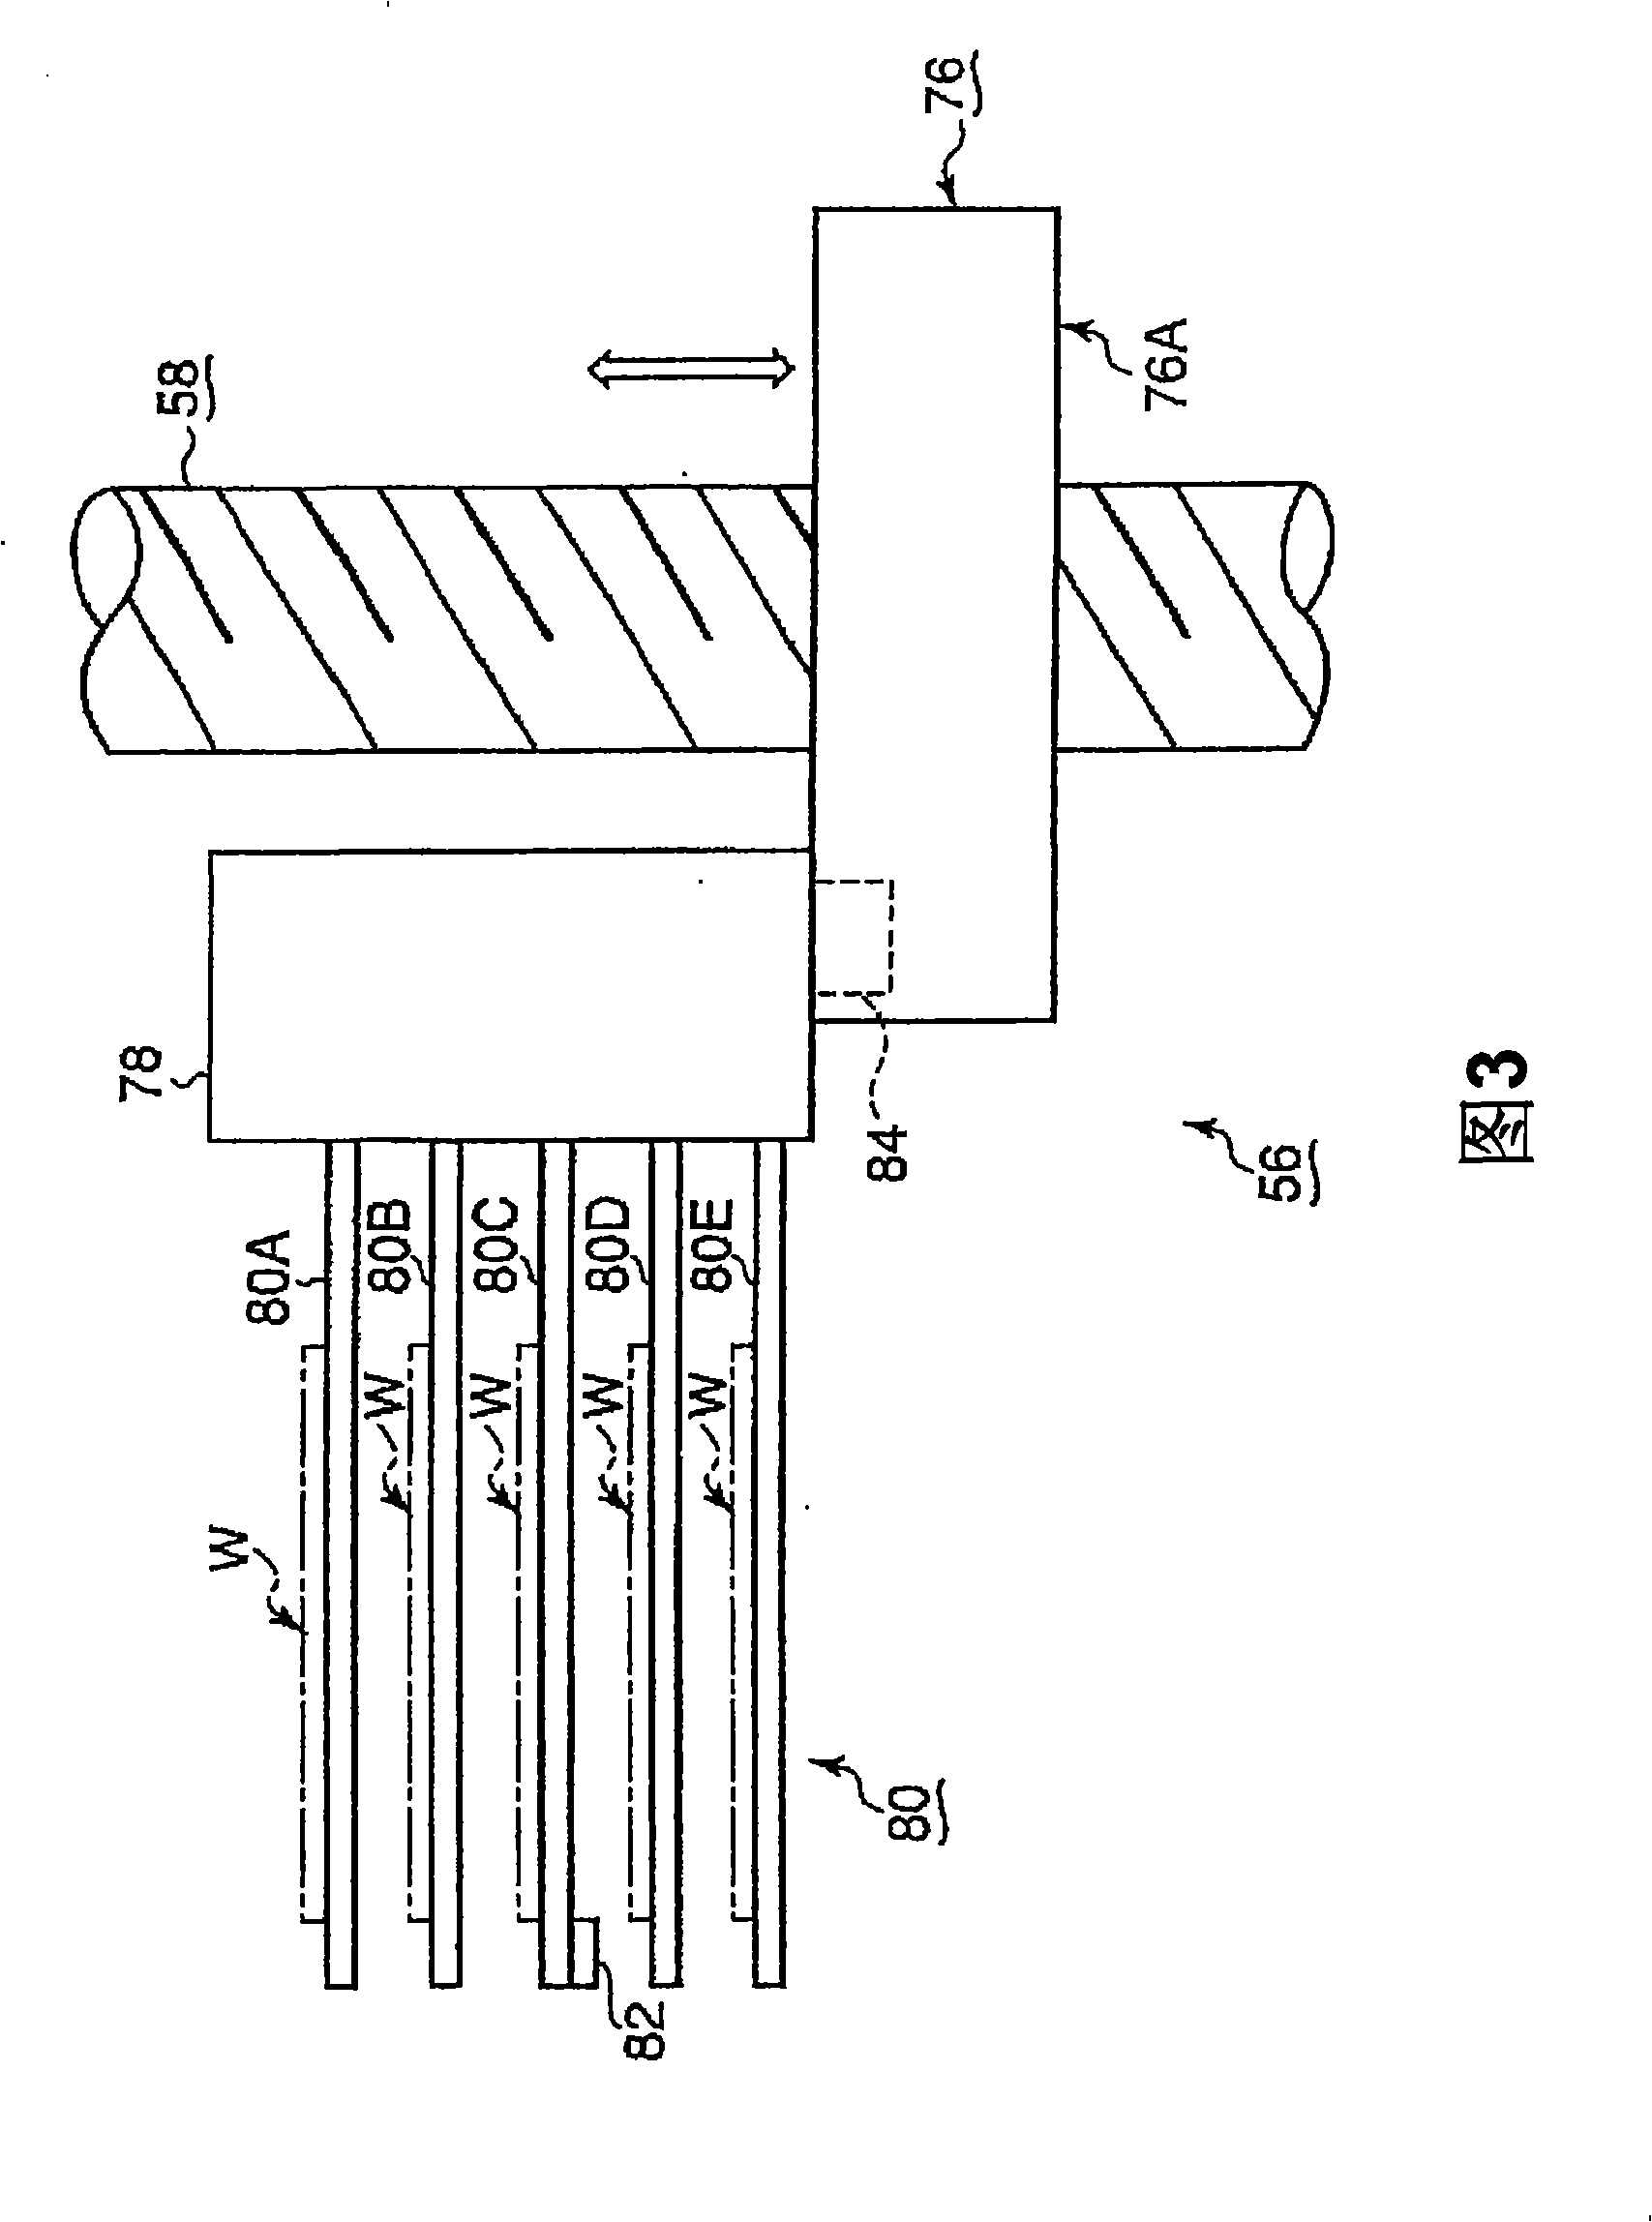 Processing system for process object and thermal processing method for process object